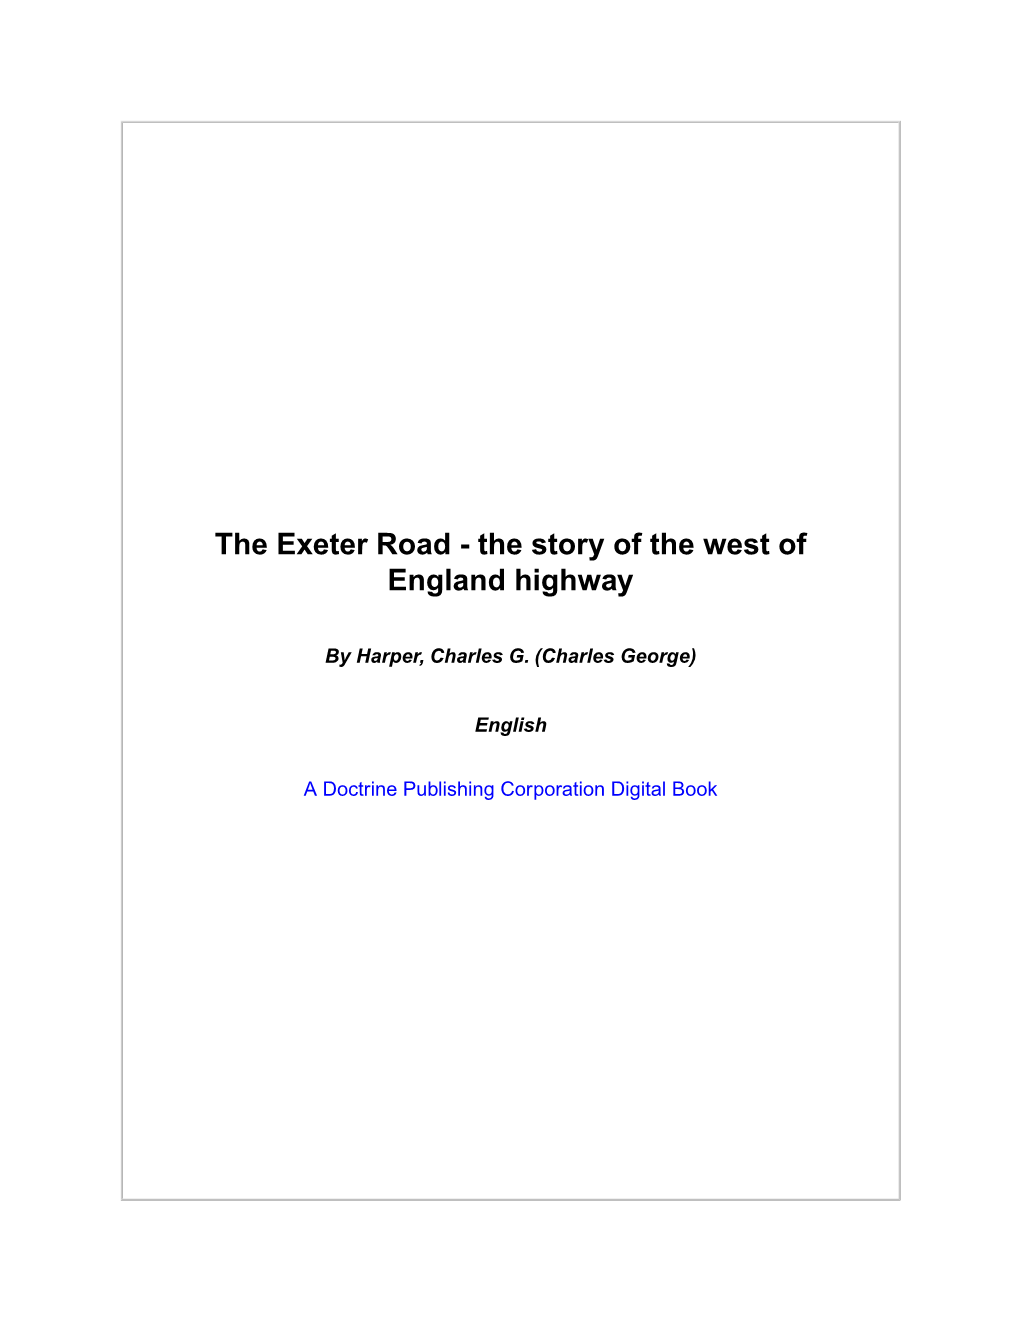 The Exeter Road - the Story of the West of England Highway